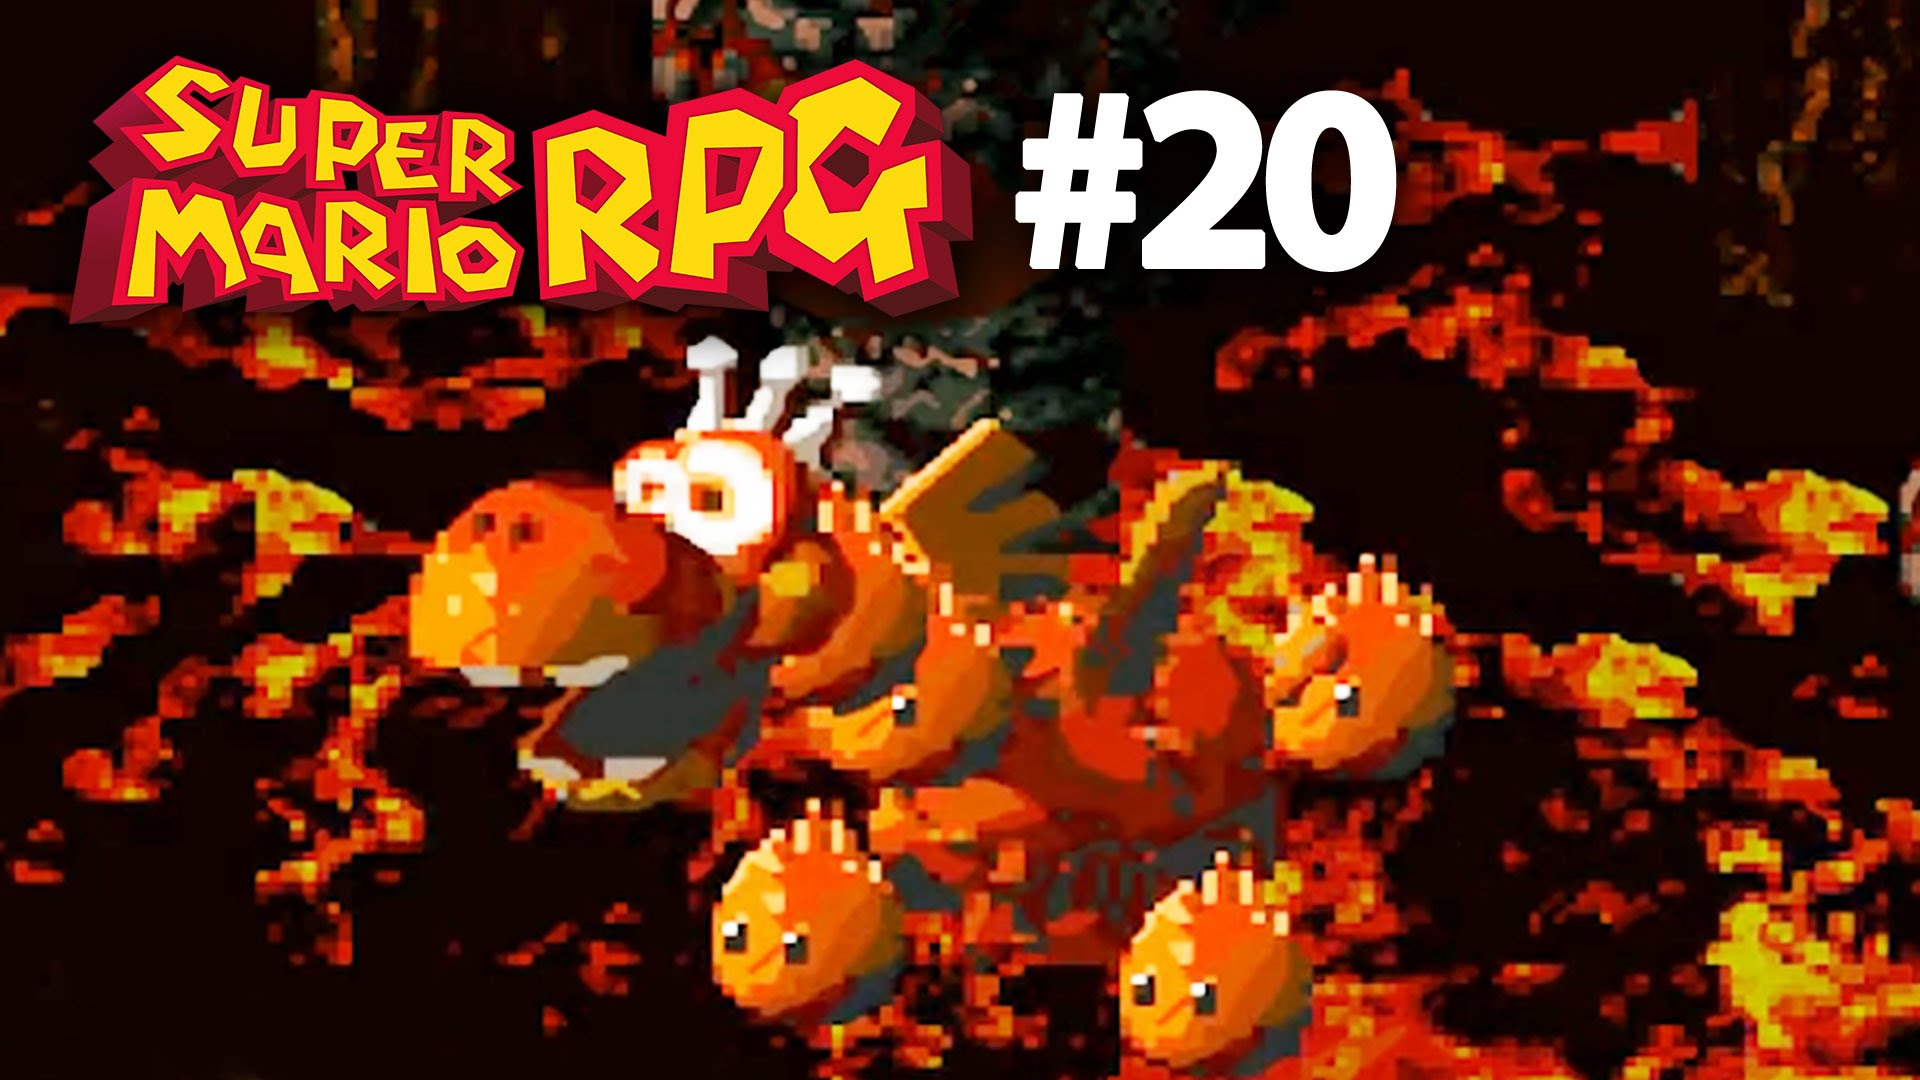 Dragon Zombie From Hell! -- Super Mario RPG #20 - YouTube